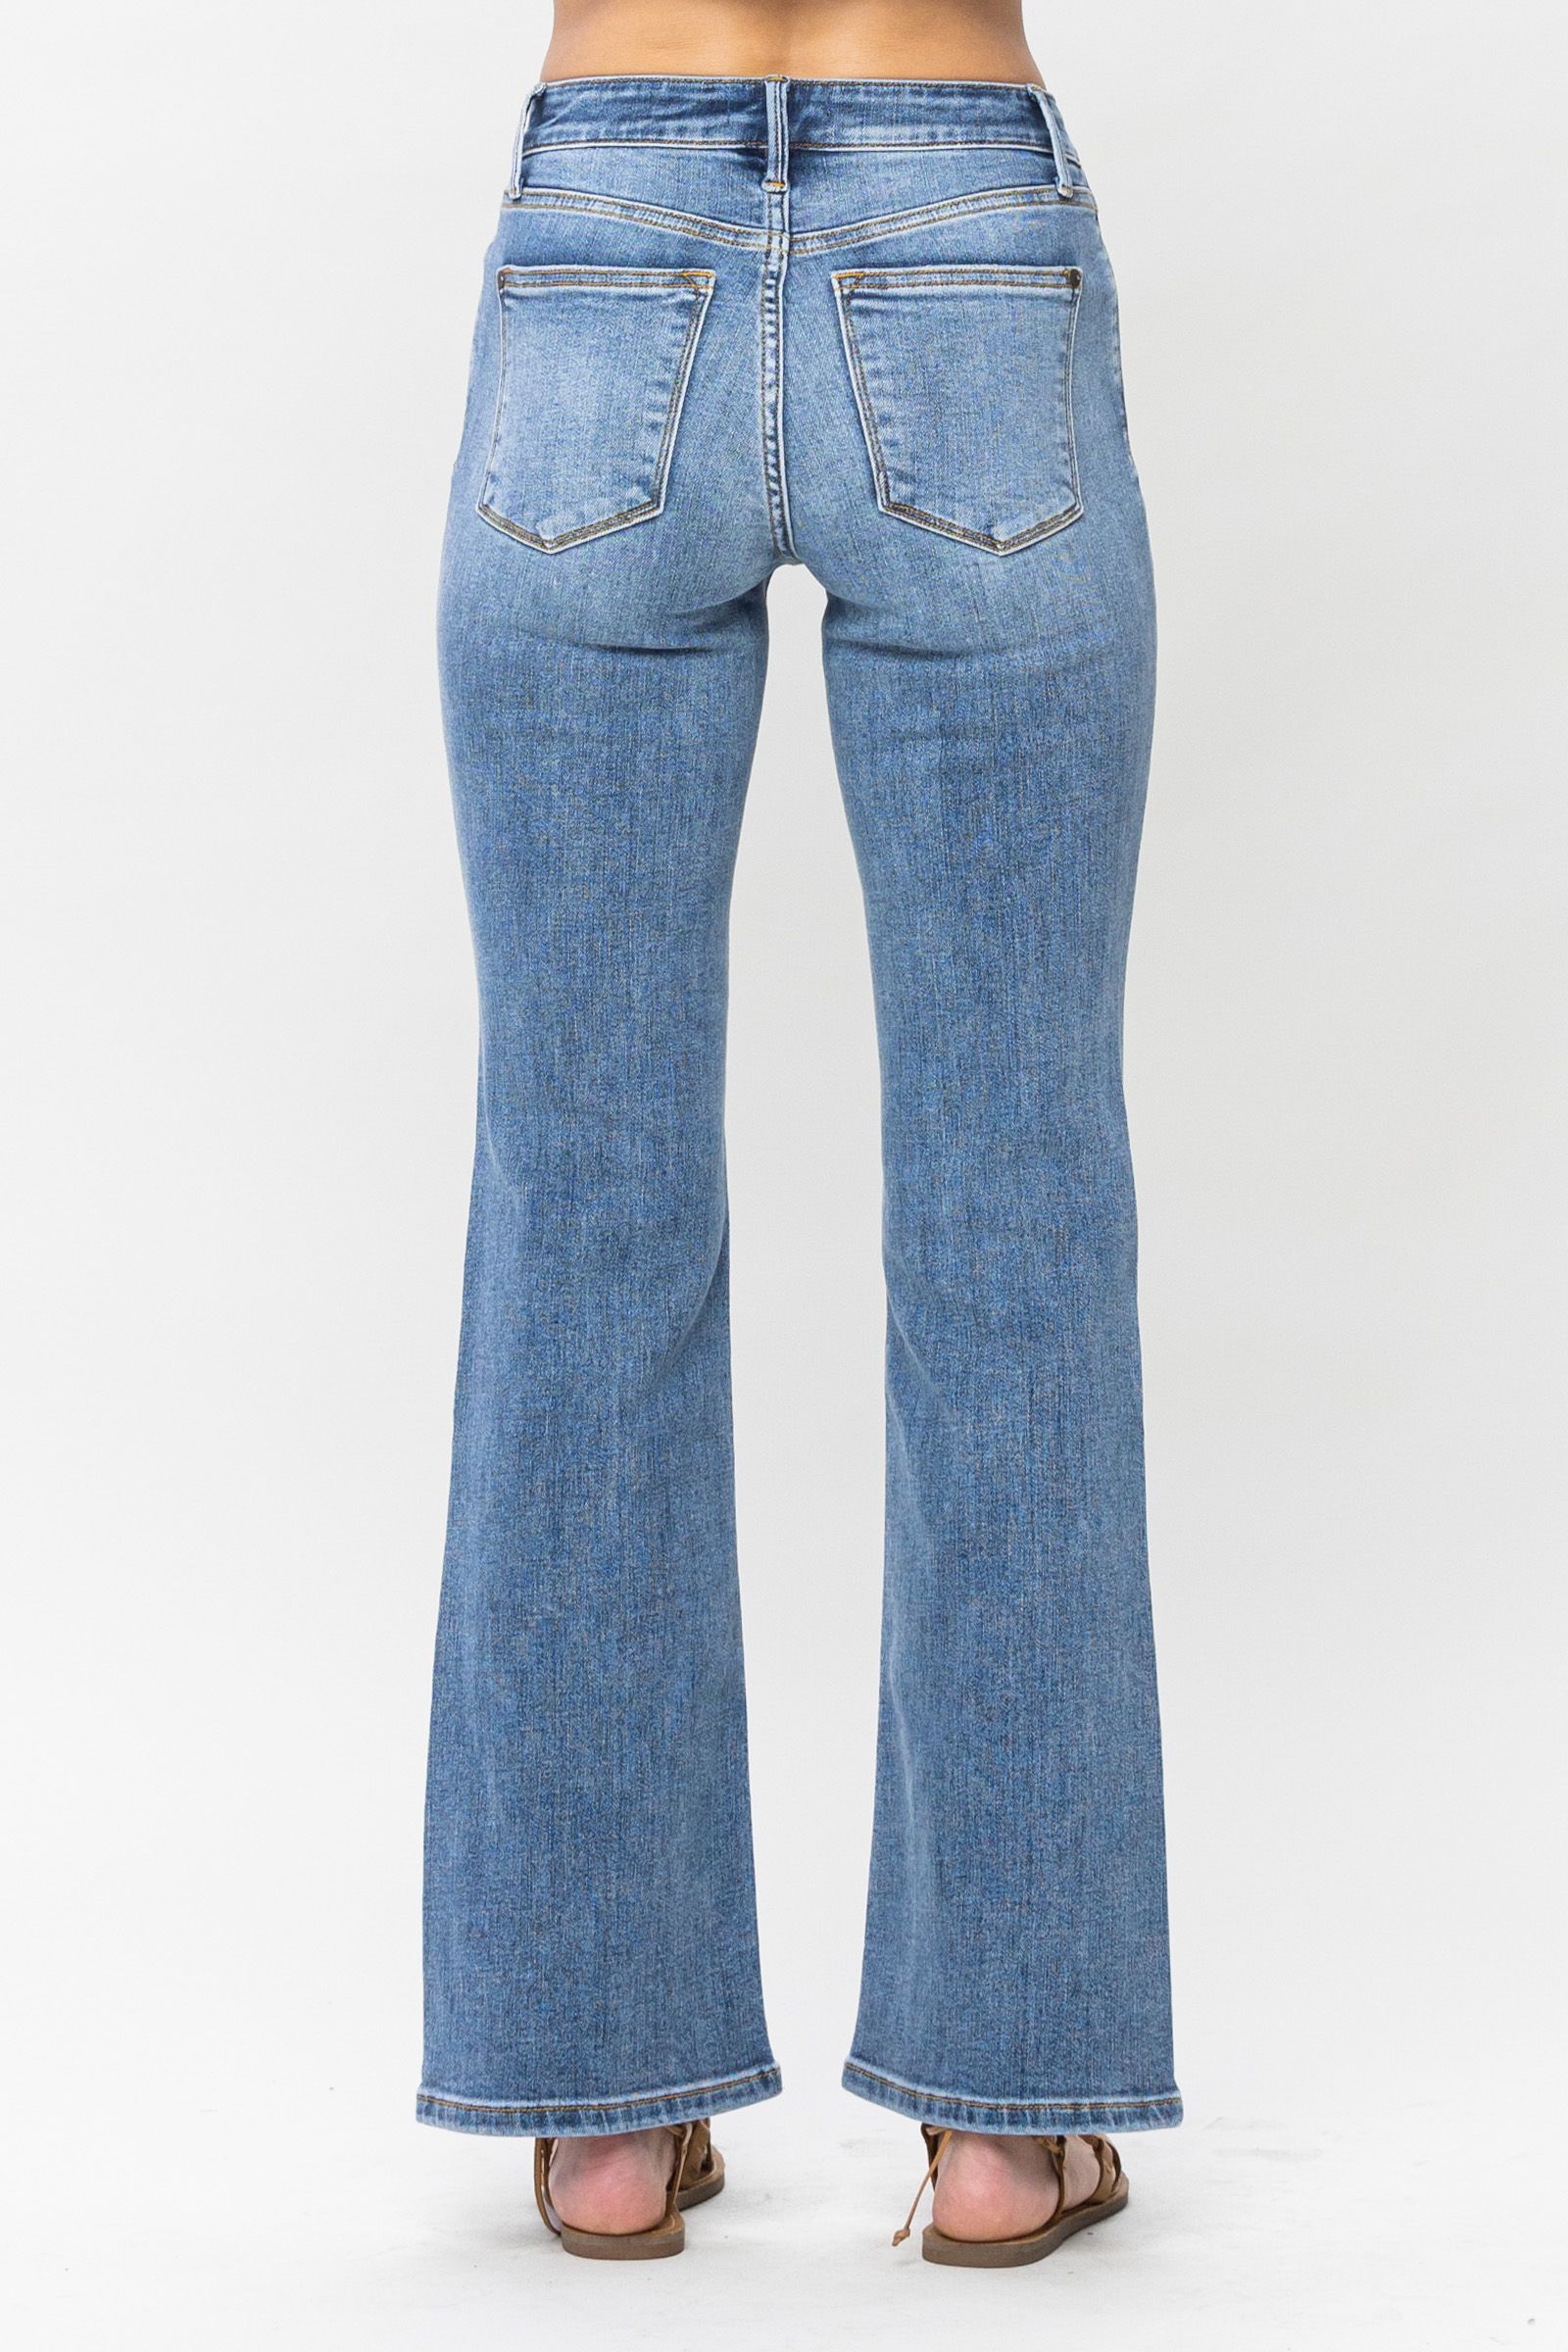 Judy blue curvy MID RISE VINTAGE BUTTON FLY BOOTCUT